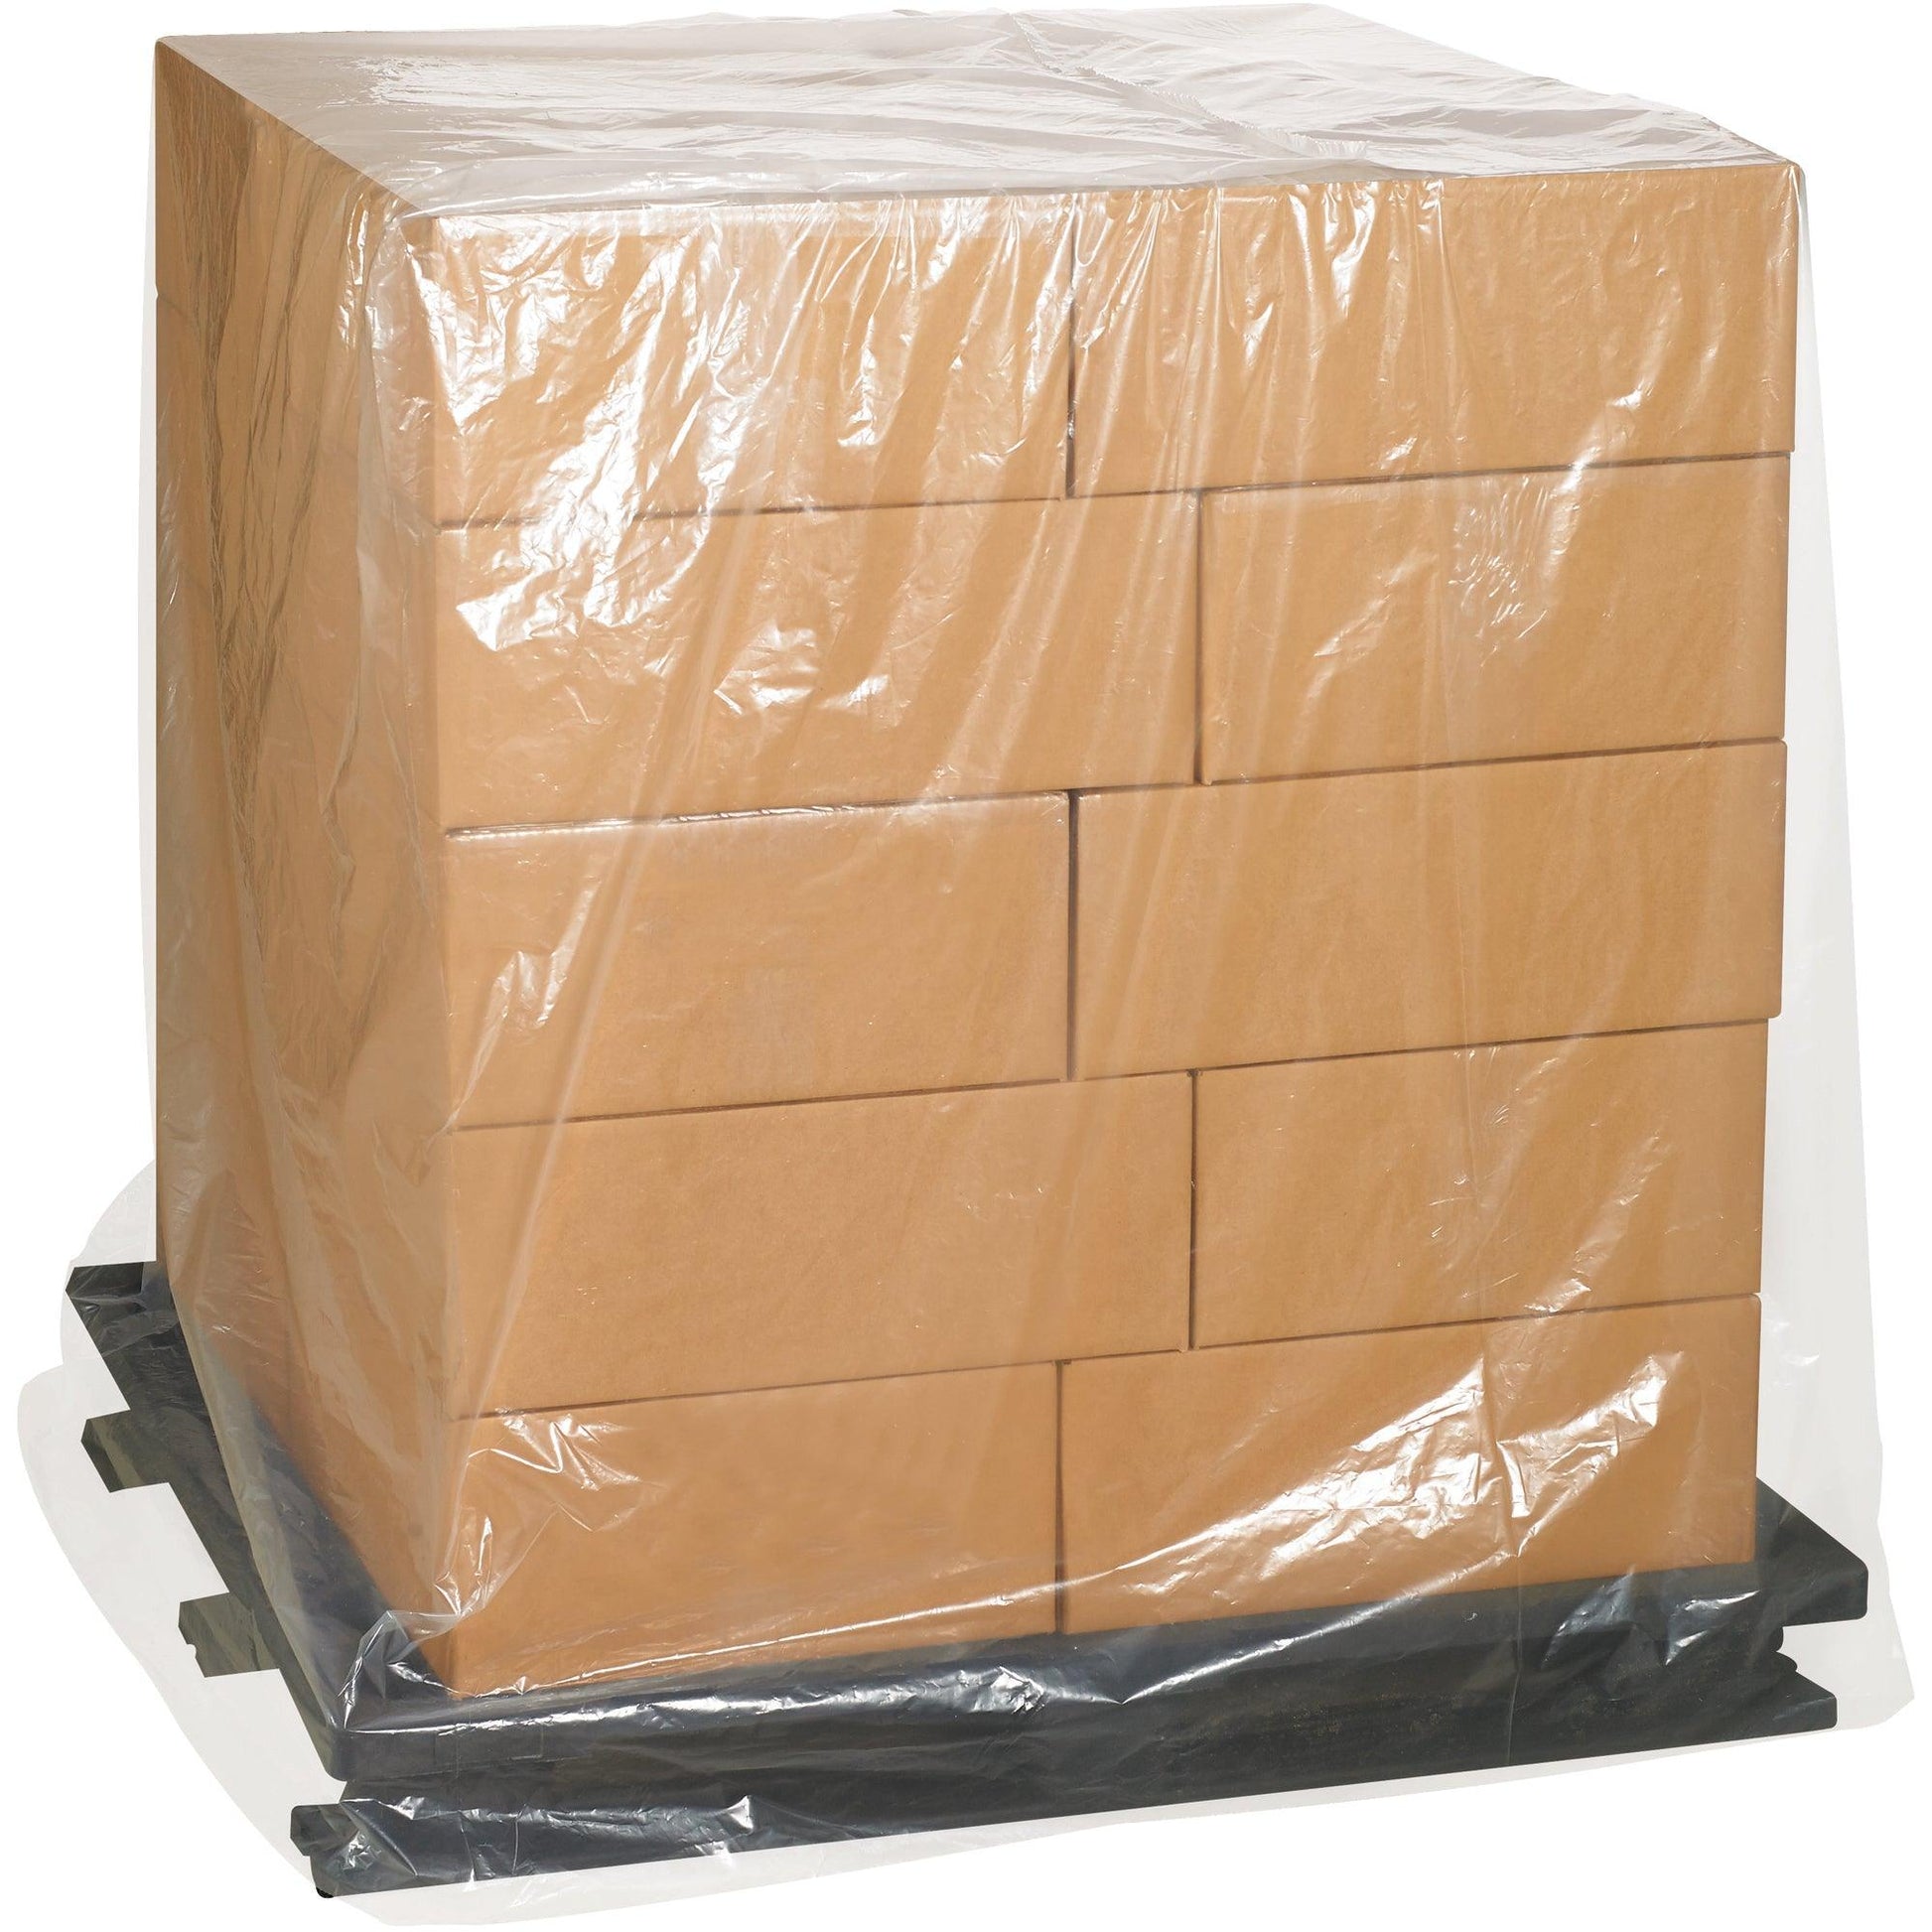 36 x 28 x 52" - 3 Mil Clear Pallet Covers - PC132